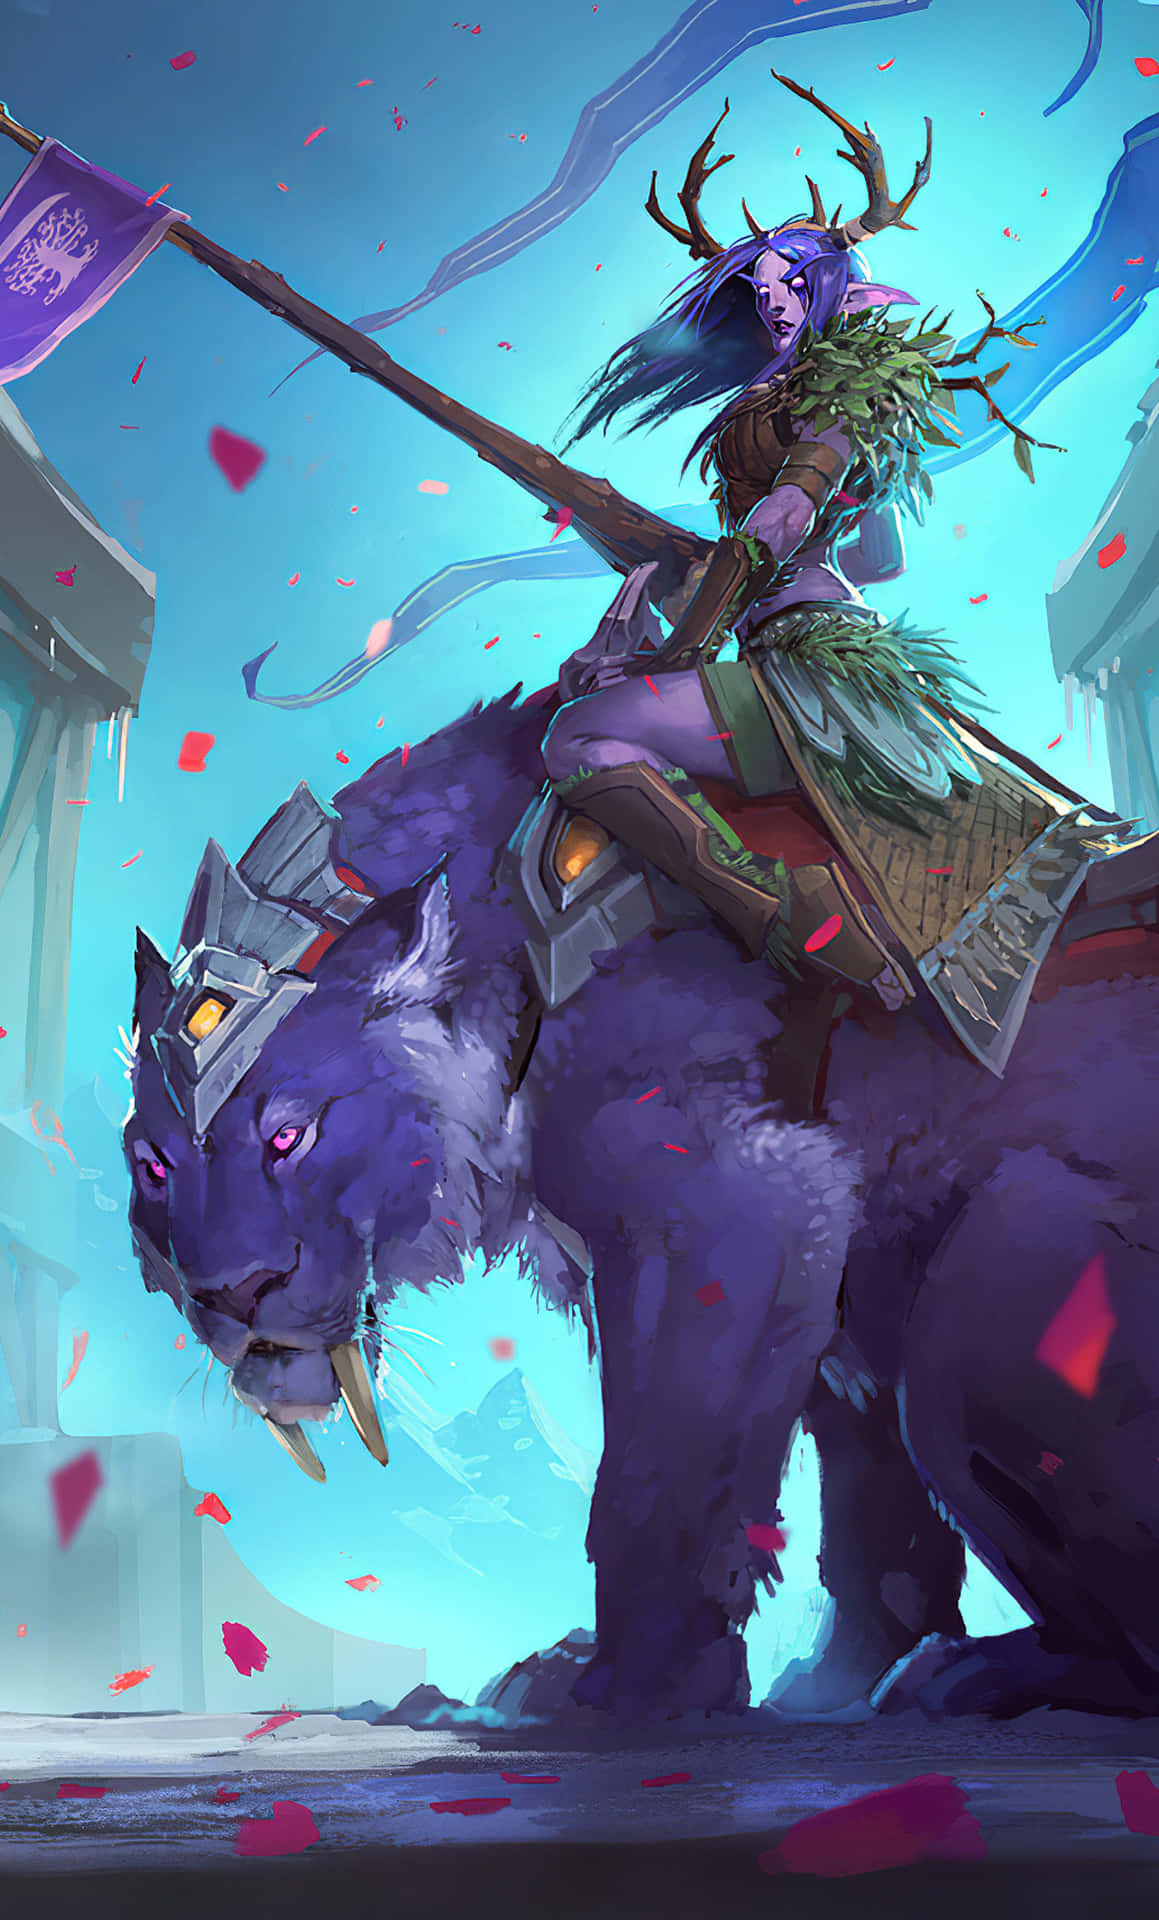 A Woman Riding A Purple Animal With A Sword